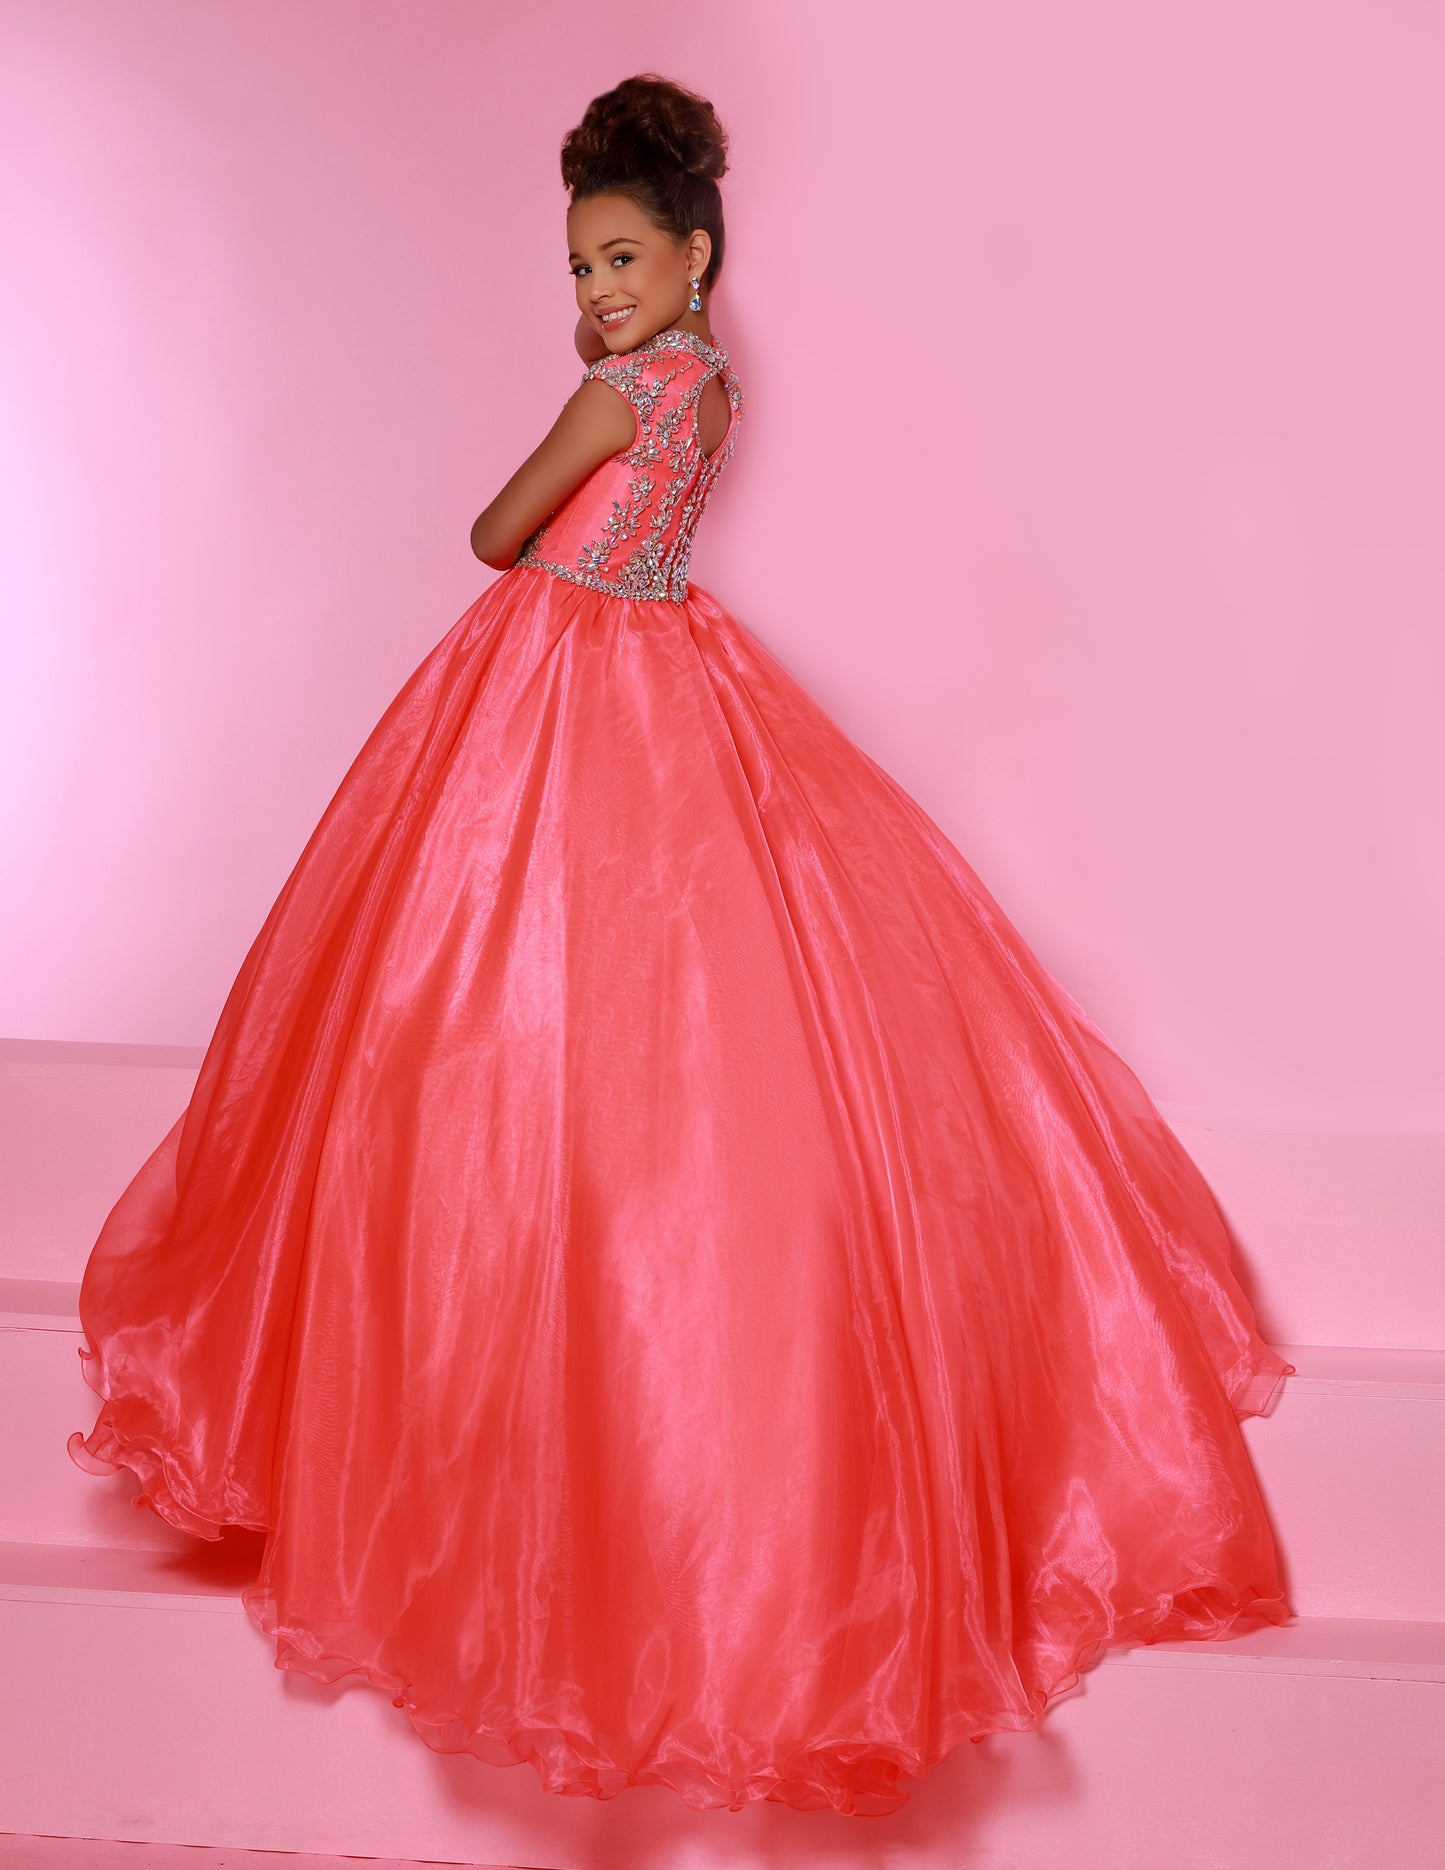 Sugar Kayne C162 is a Long A Line Girls Pageant Ballgown dress. Featuring a fitted embellished bodice with a choker style keyhole cutout in the front and back.  Colors:  Hot Coral, Electric Blue  Sizes:  2-16  (Sizes 2-6 do not have bust cups, Sizes 8-16 will have preteen size bust cups)